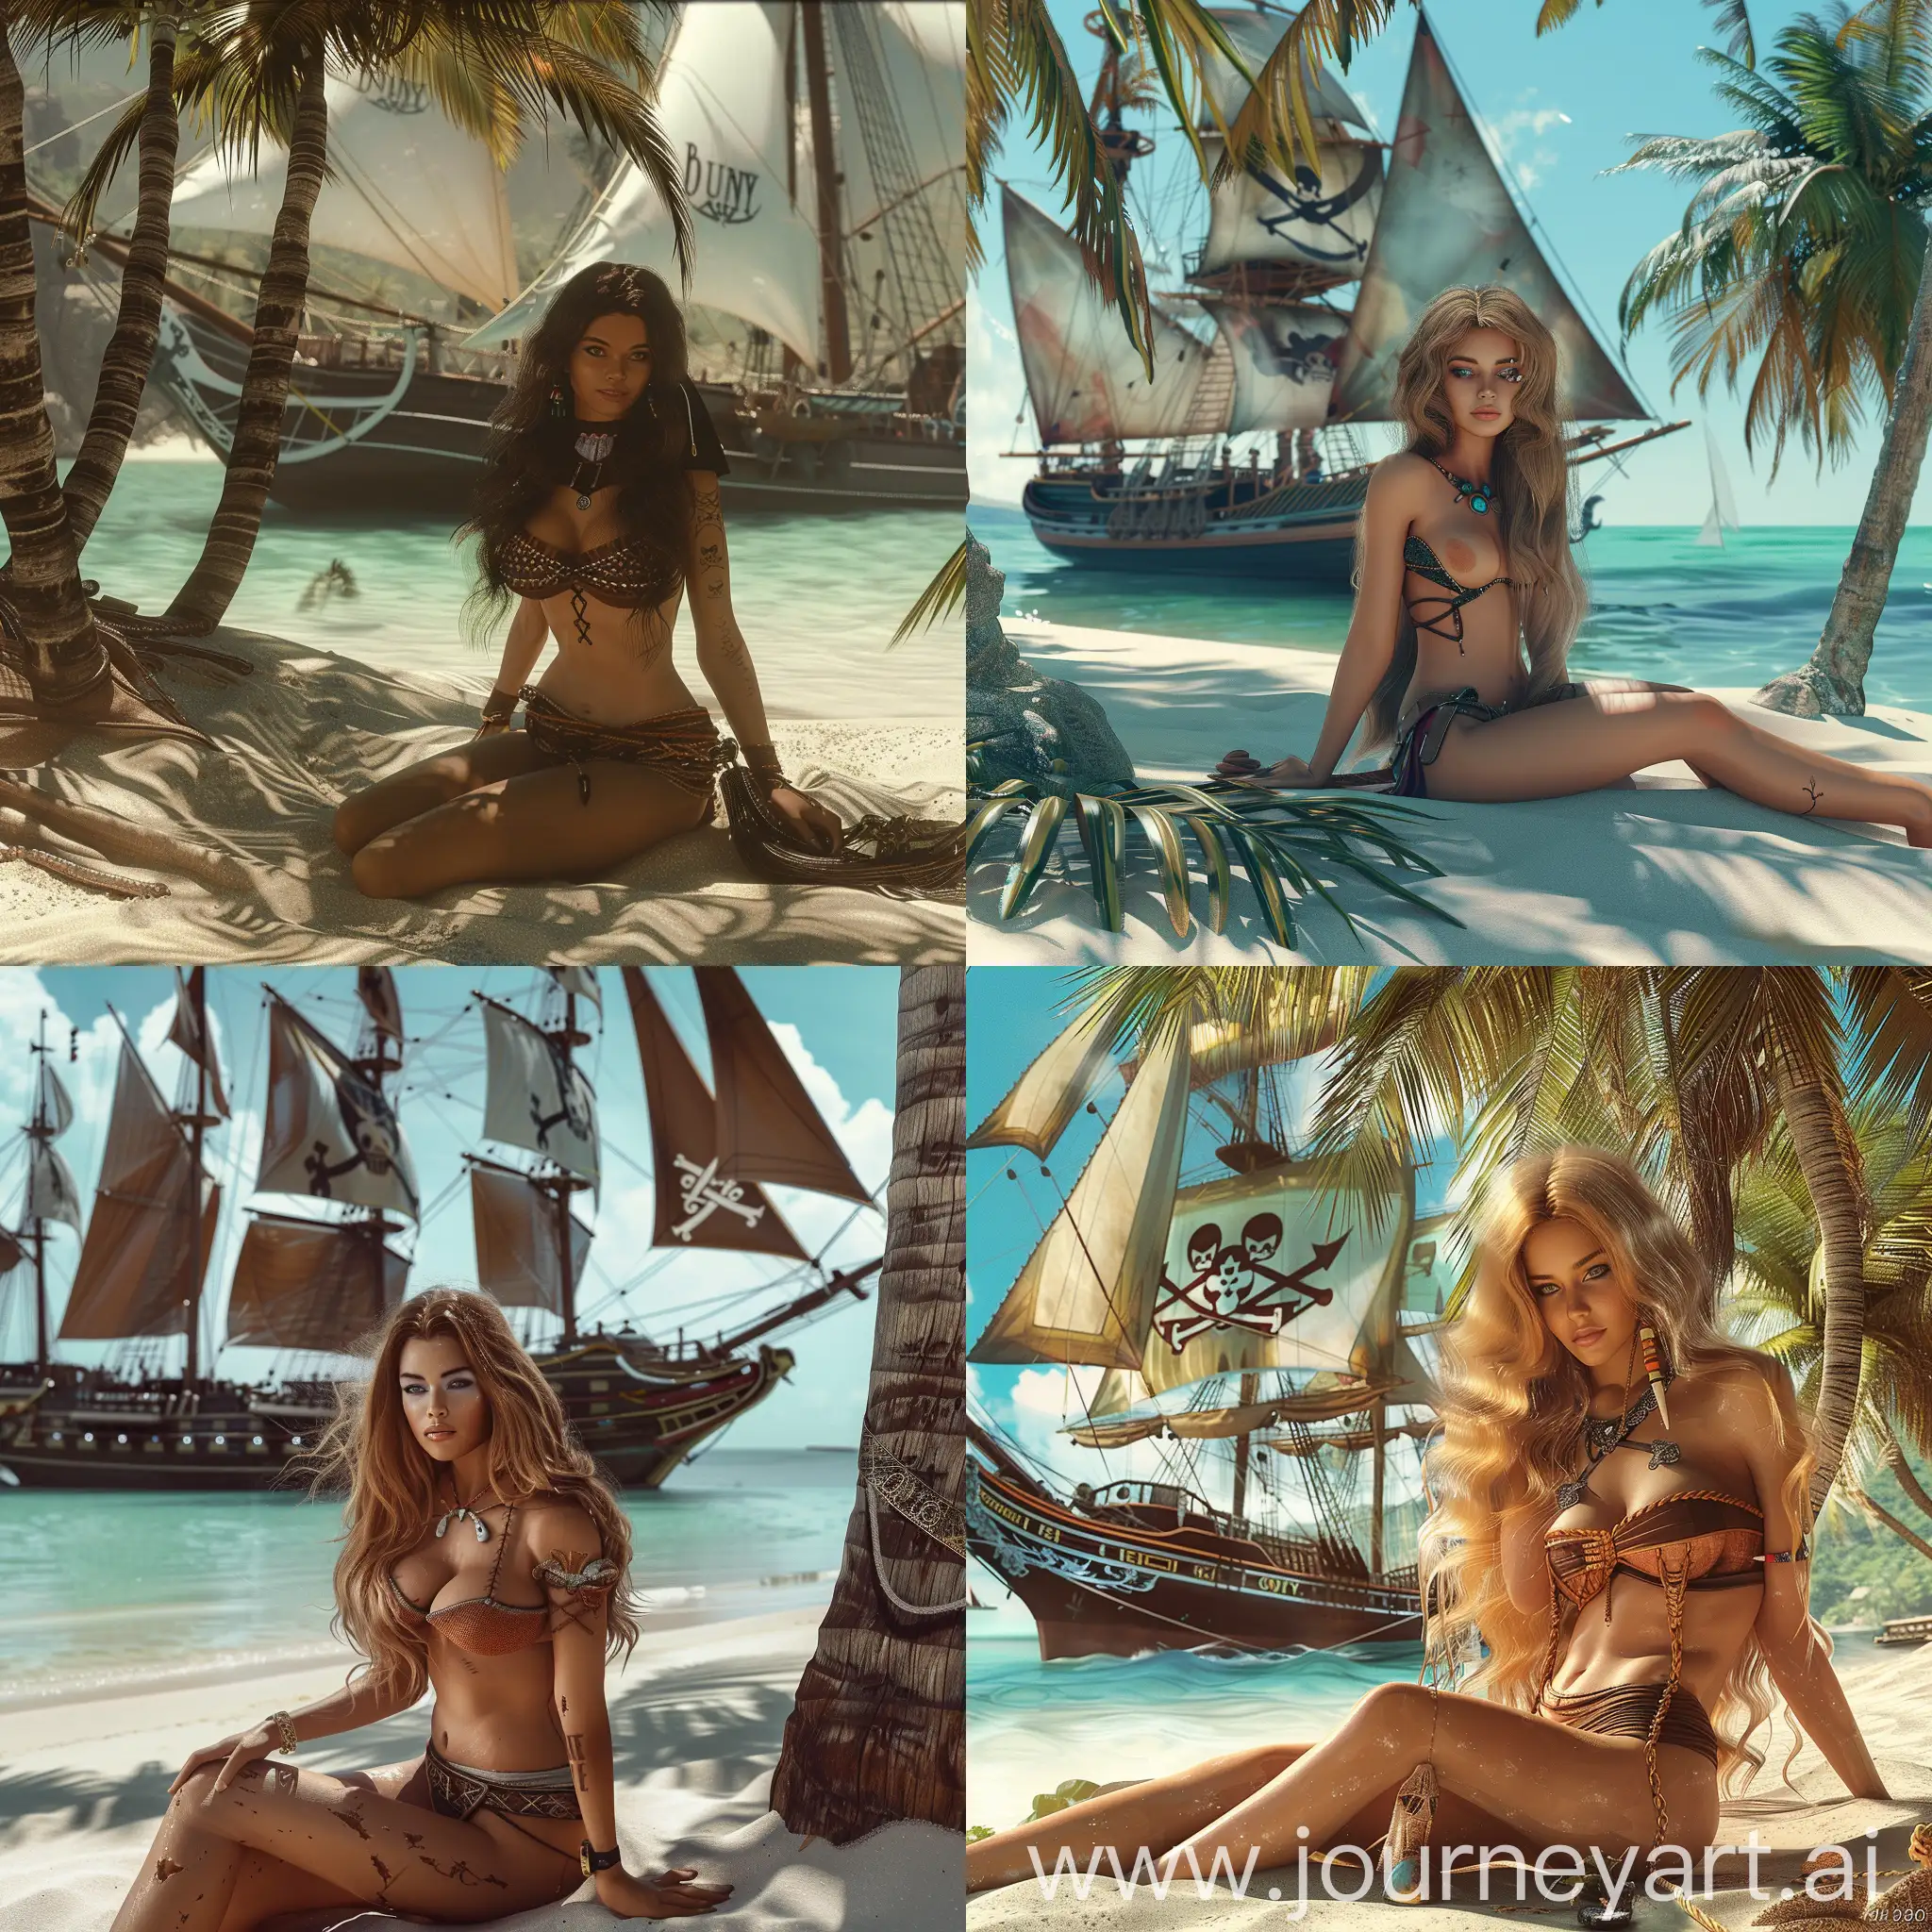 Stunning-Pirate-Maiden-by-the-Bounty-Ship-in-HyperRealistic-Lagoon-Scene